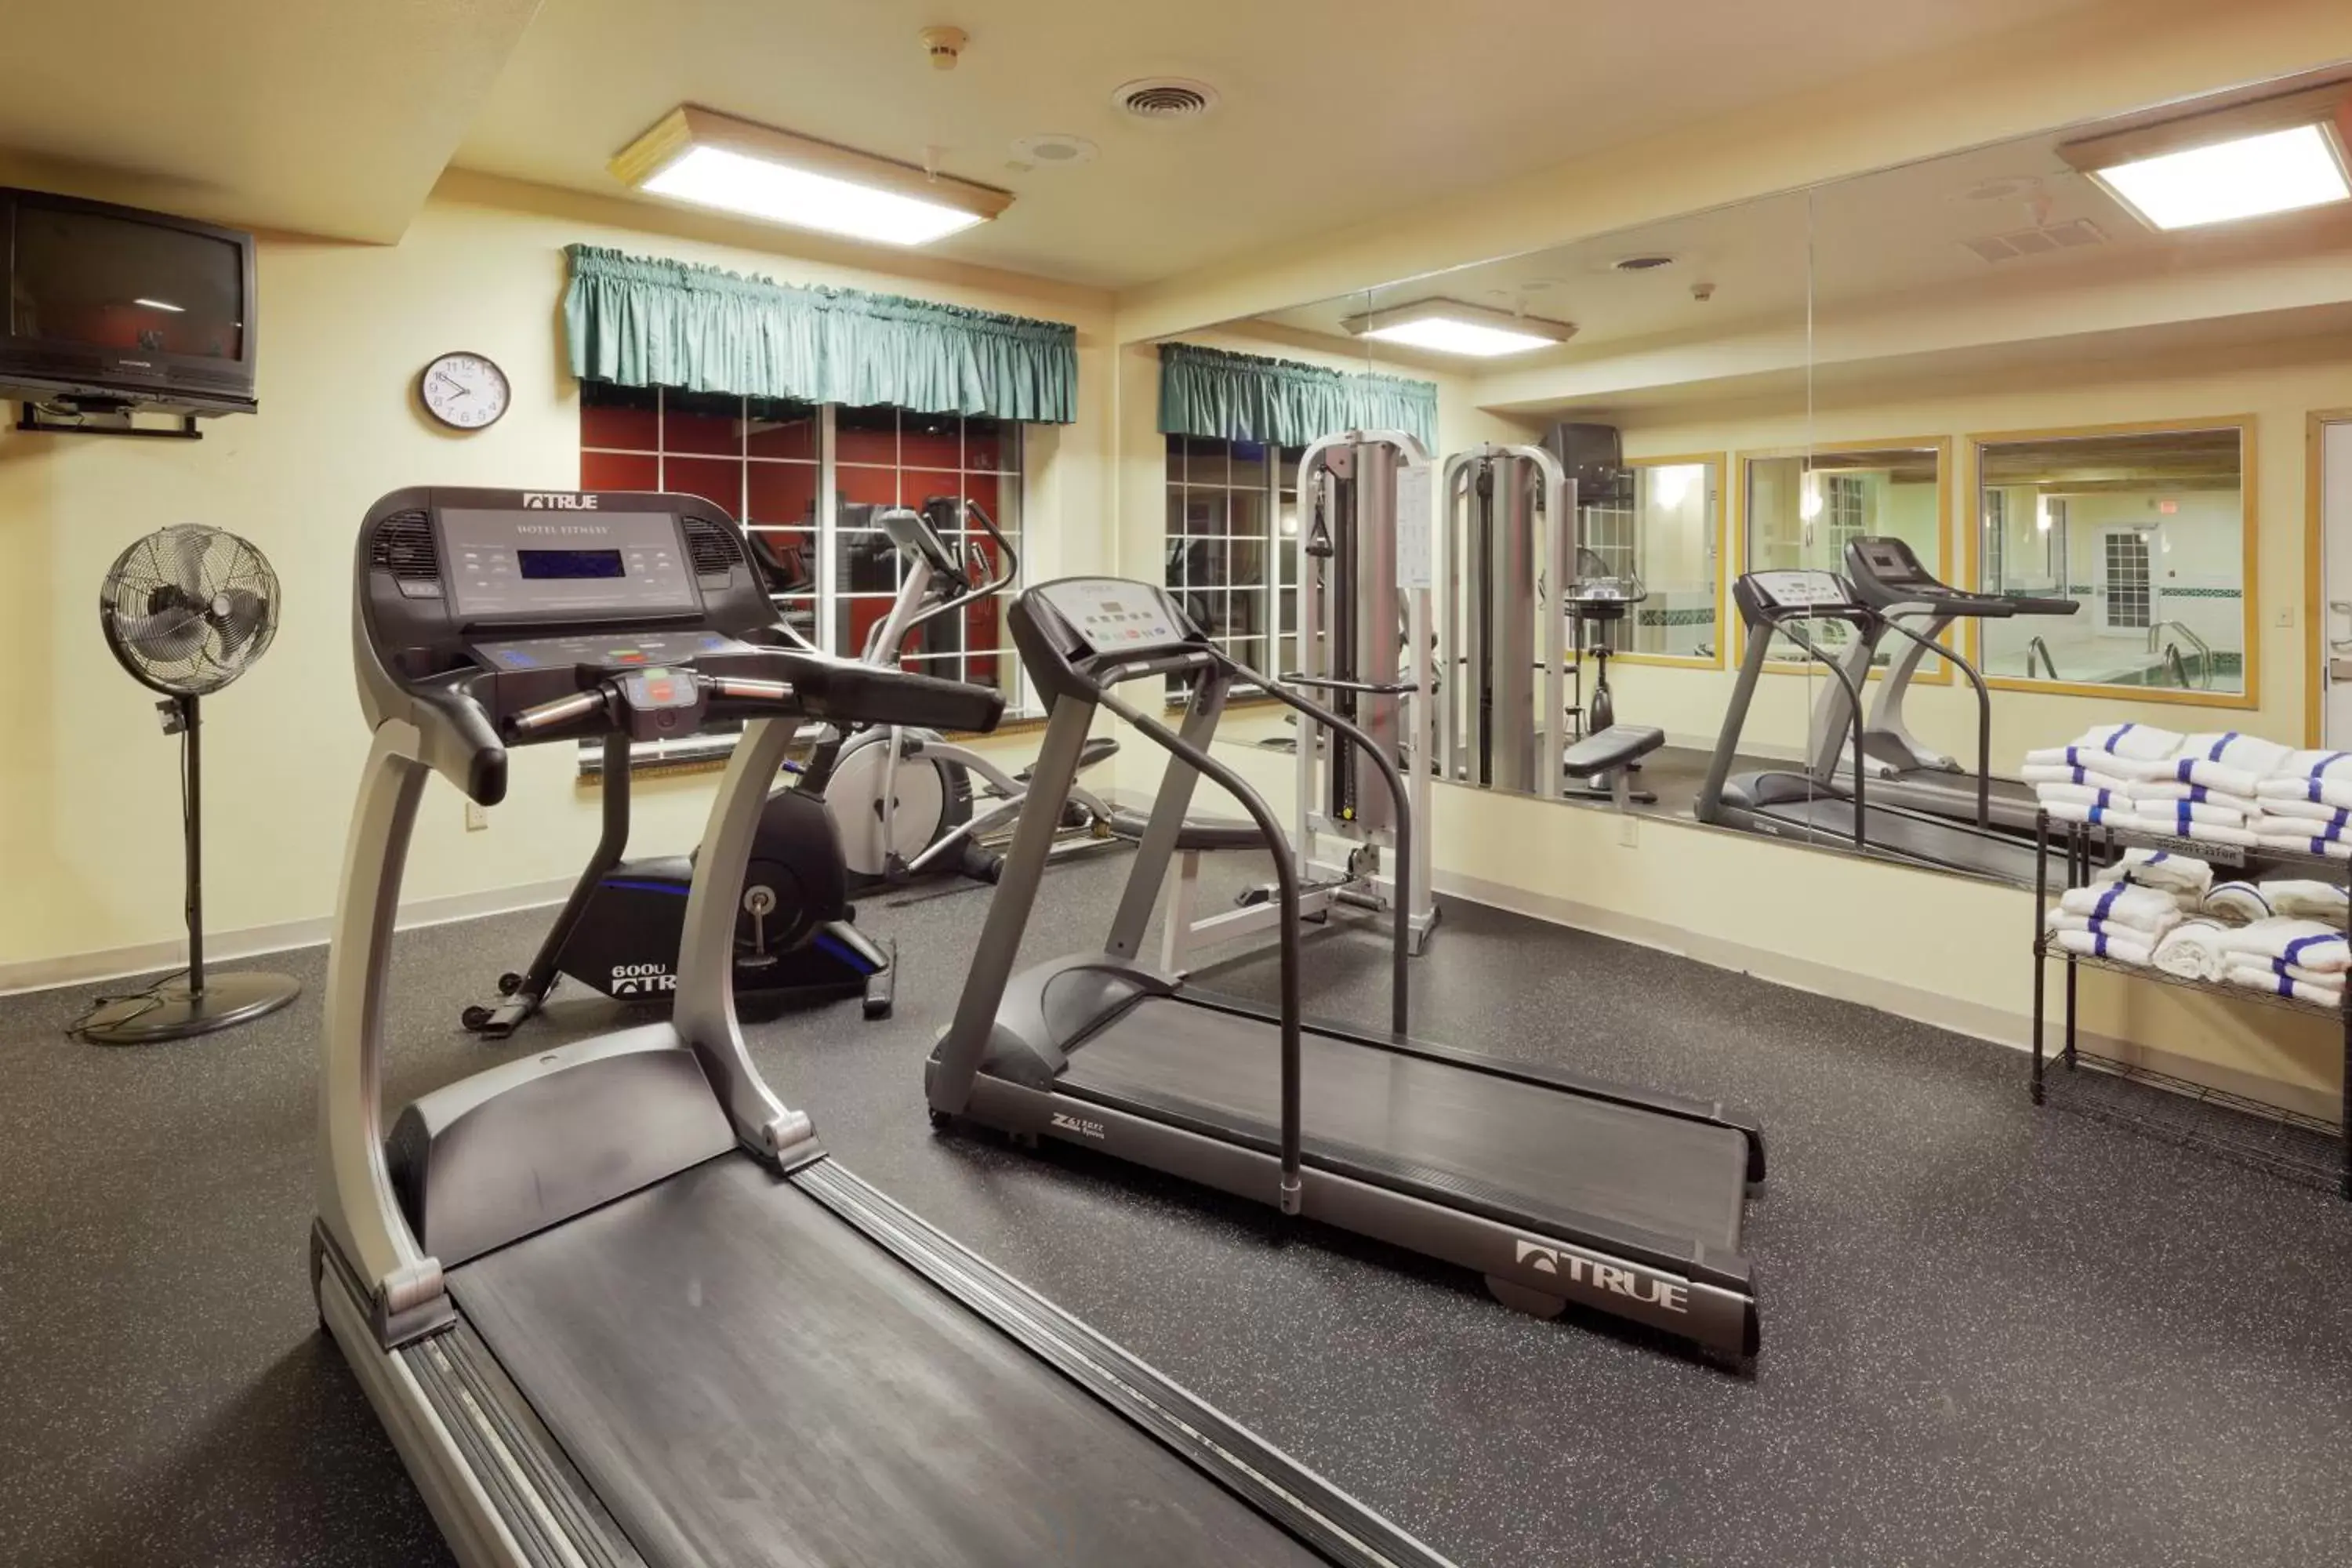 Fitness centre/facilities, Fitness Center/Facilities in Country Inn & Suites by Radisson, Kenosha, WI